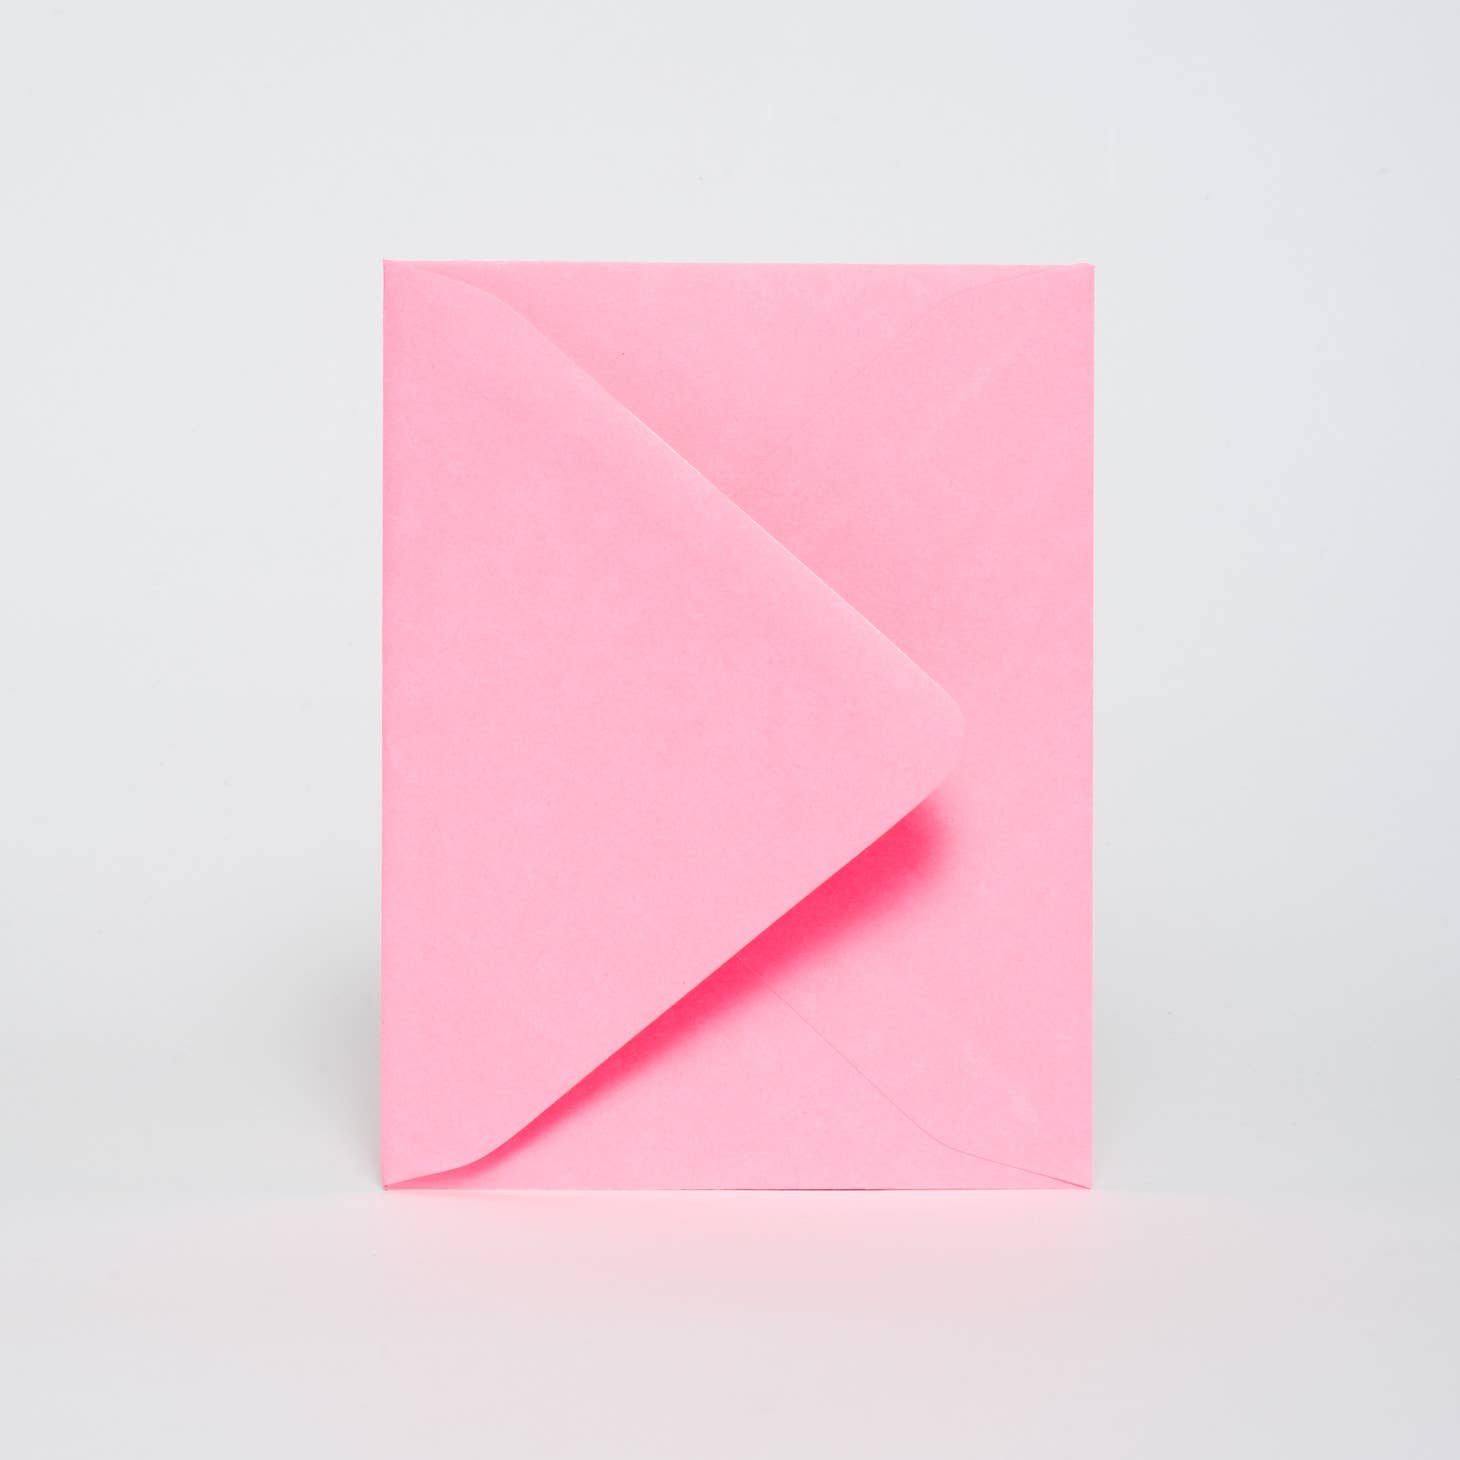 The included envelope for the card comes in florescent pink.